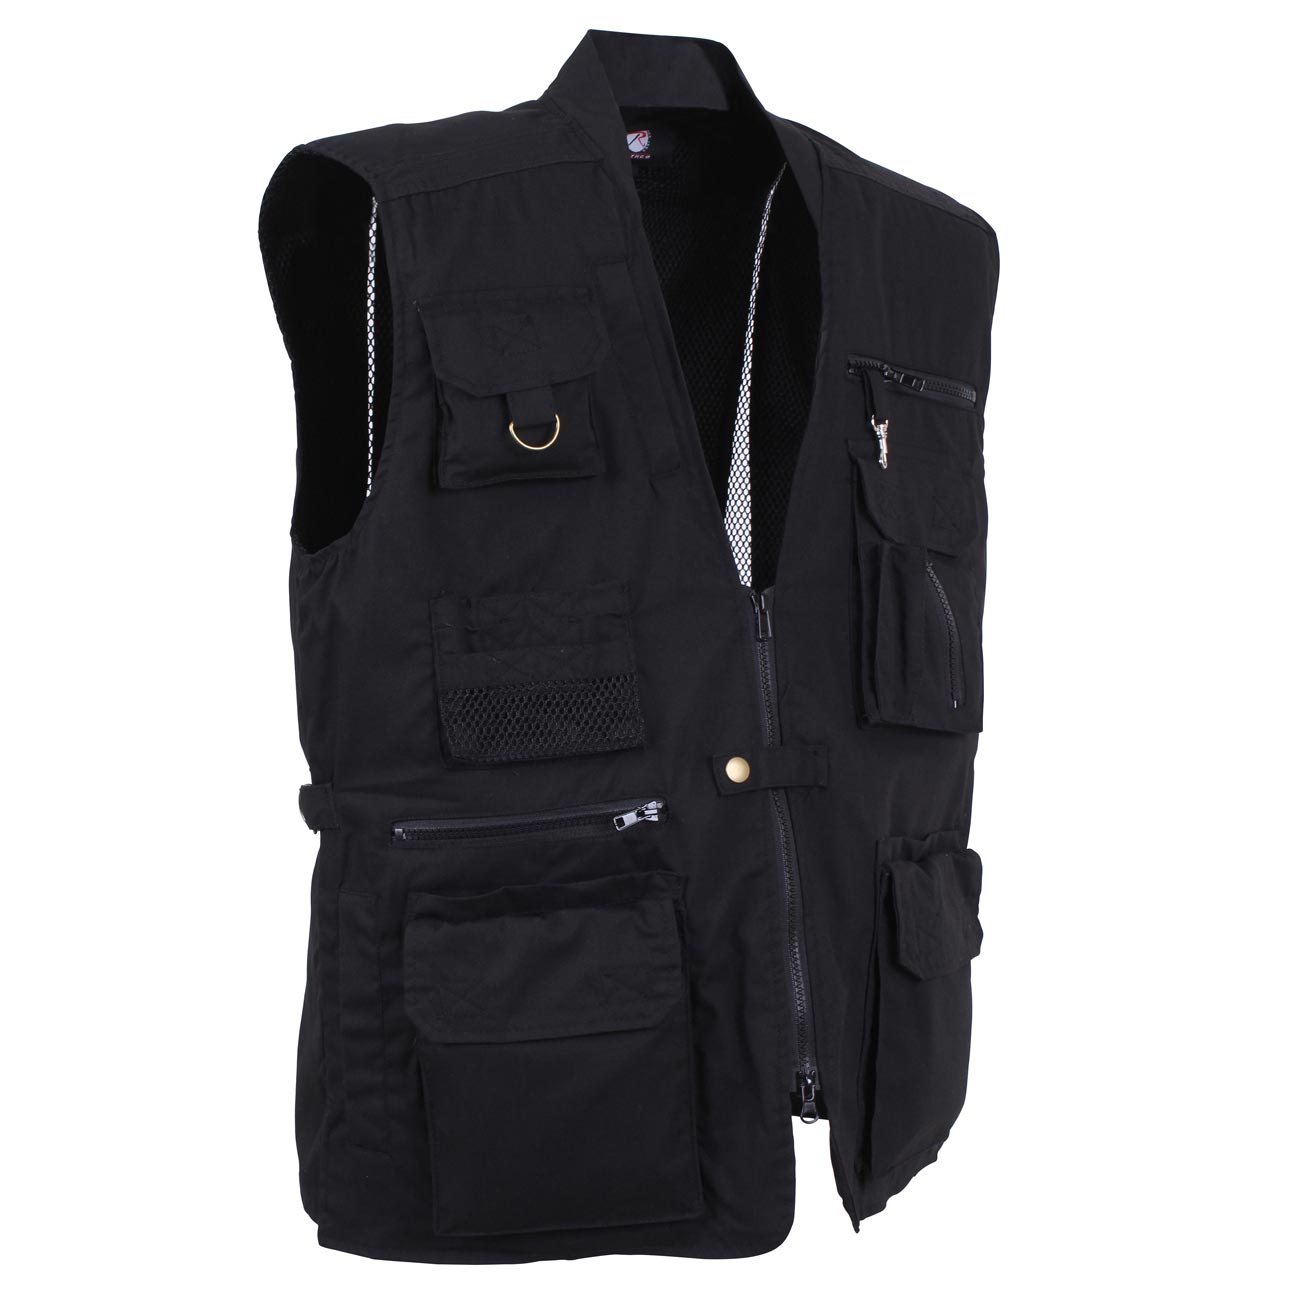 ROTHCO Tactical Vest BLACK | Army surplus MILITARY RANGE